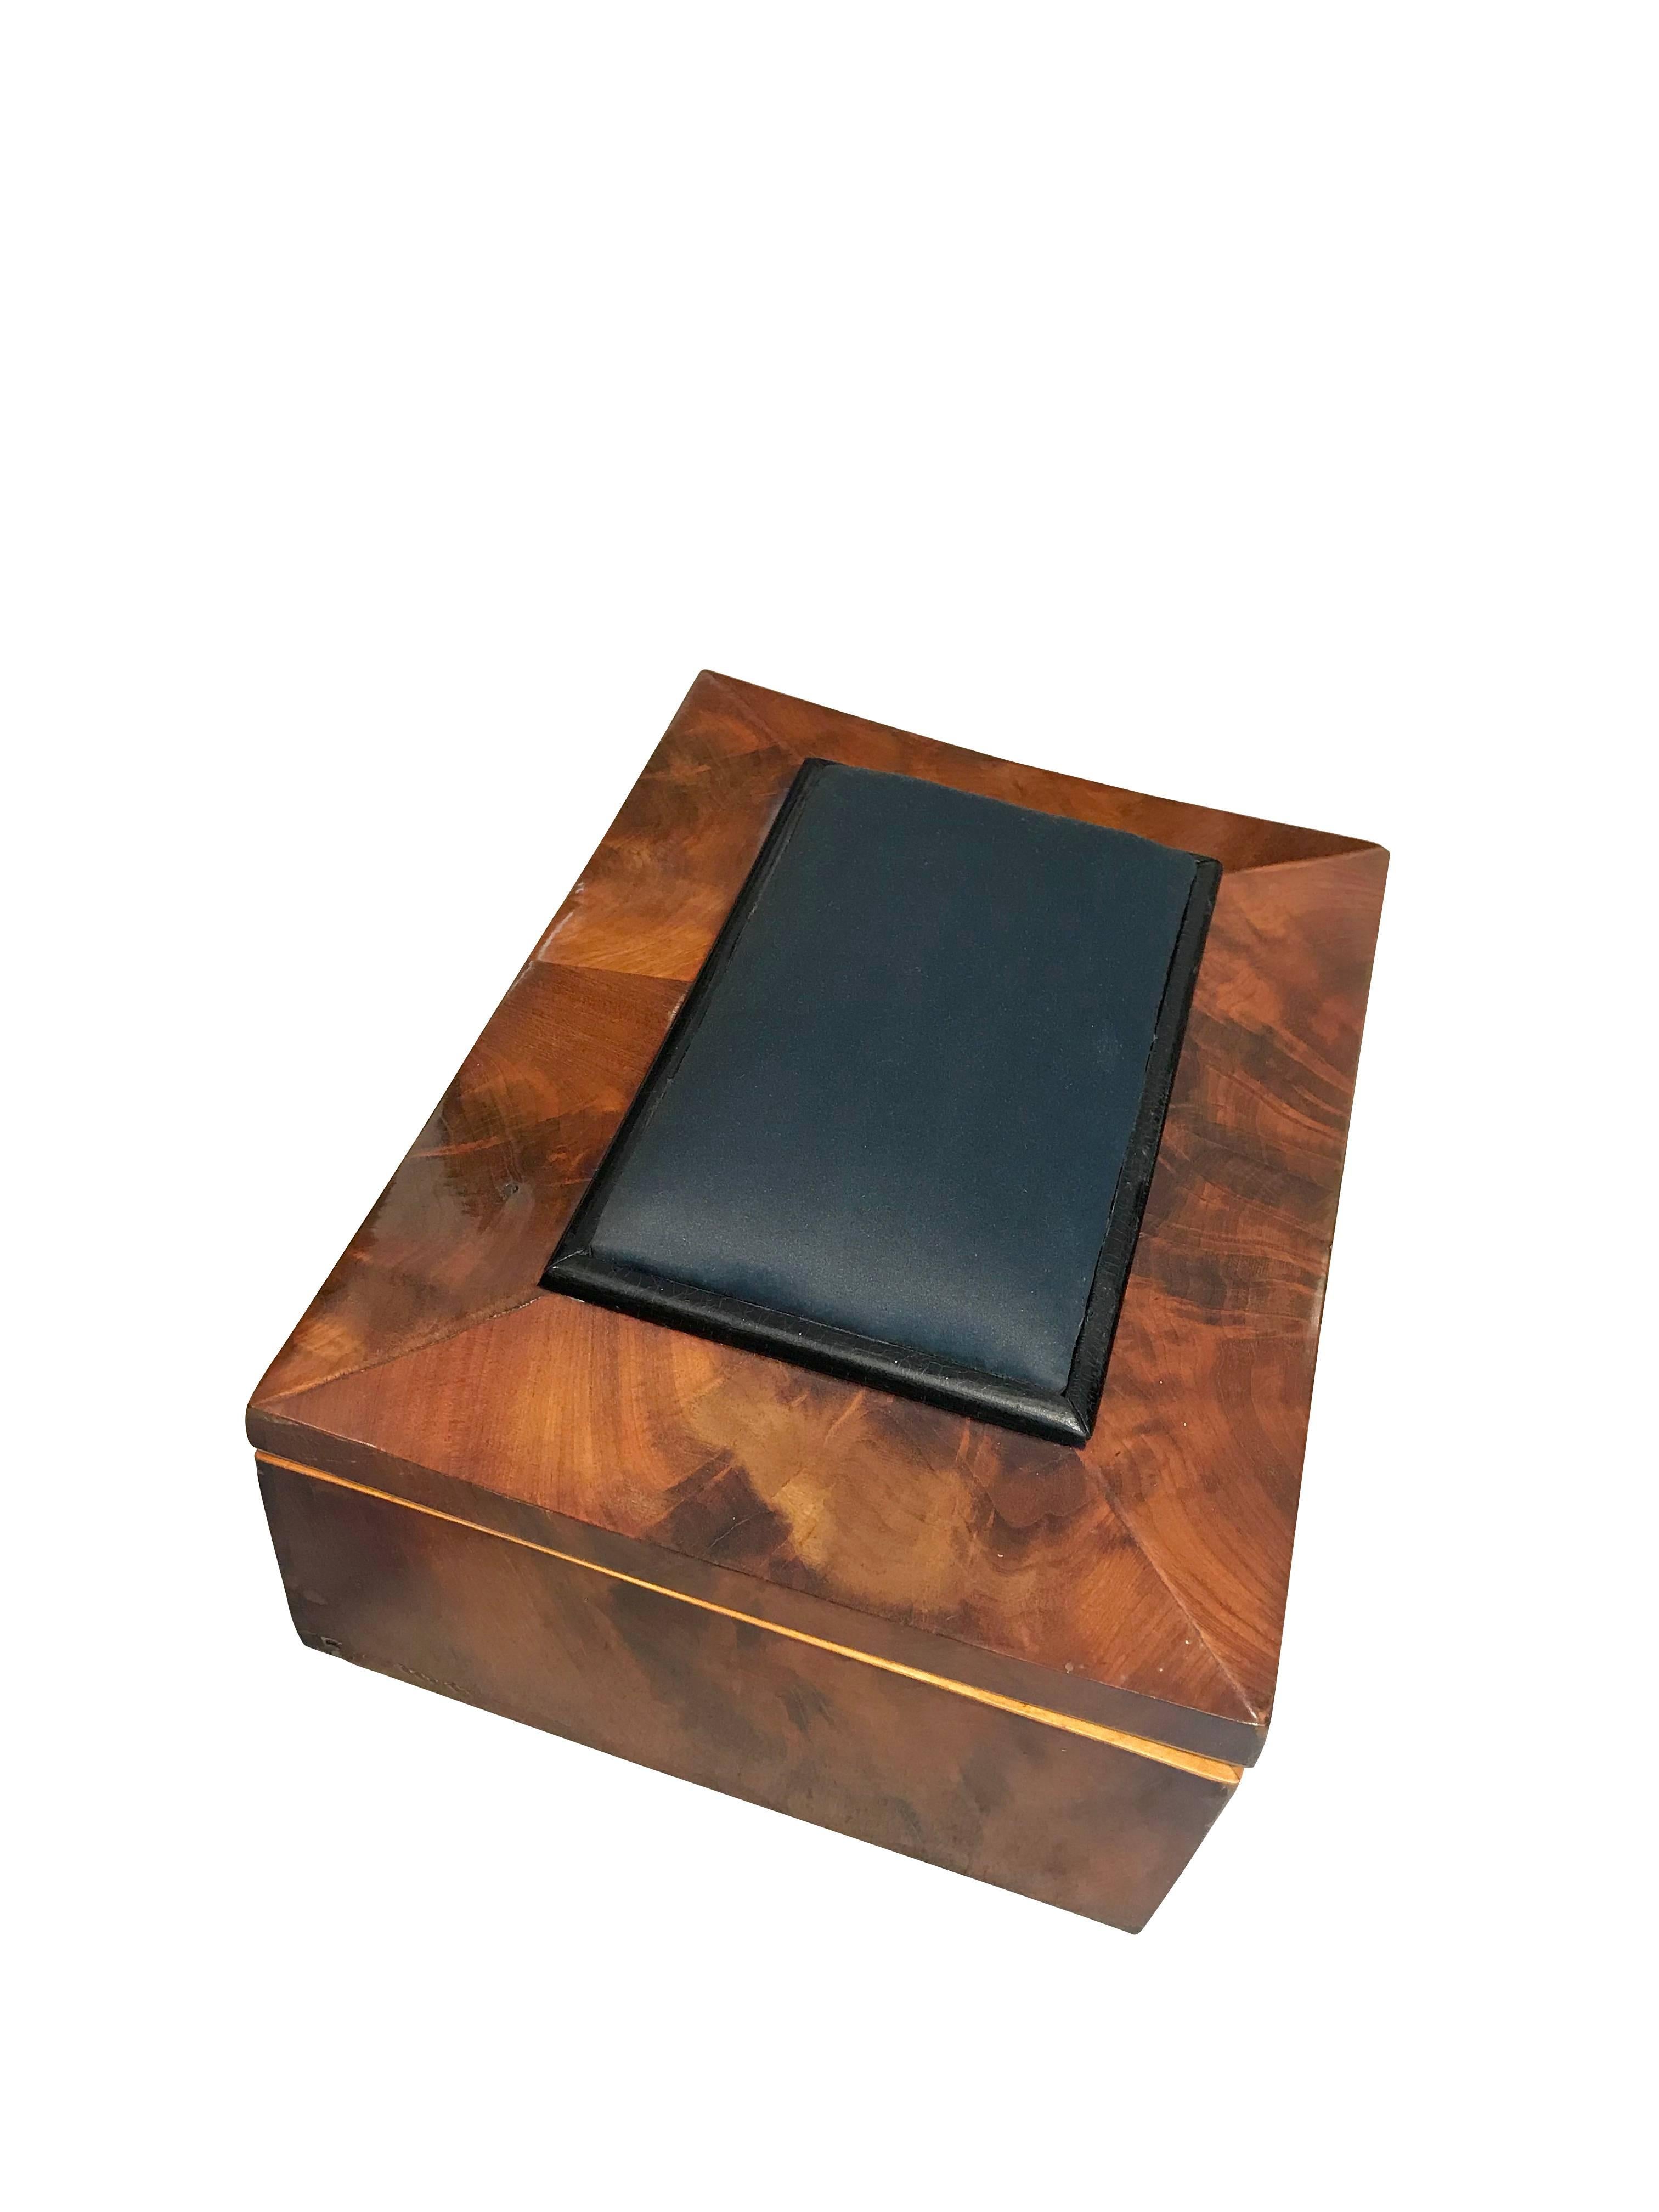 Beautiful Biedermeier sewing casket box

Mahogany in beautiful book-matched veneered and Maple
Top inside in oakwood, inlay compartments in cherrywood, drawer in beechwood
Graded top cover. Newly upholstered with black fabric needle cushion